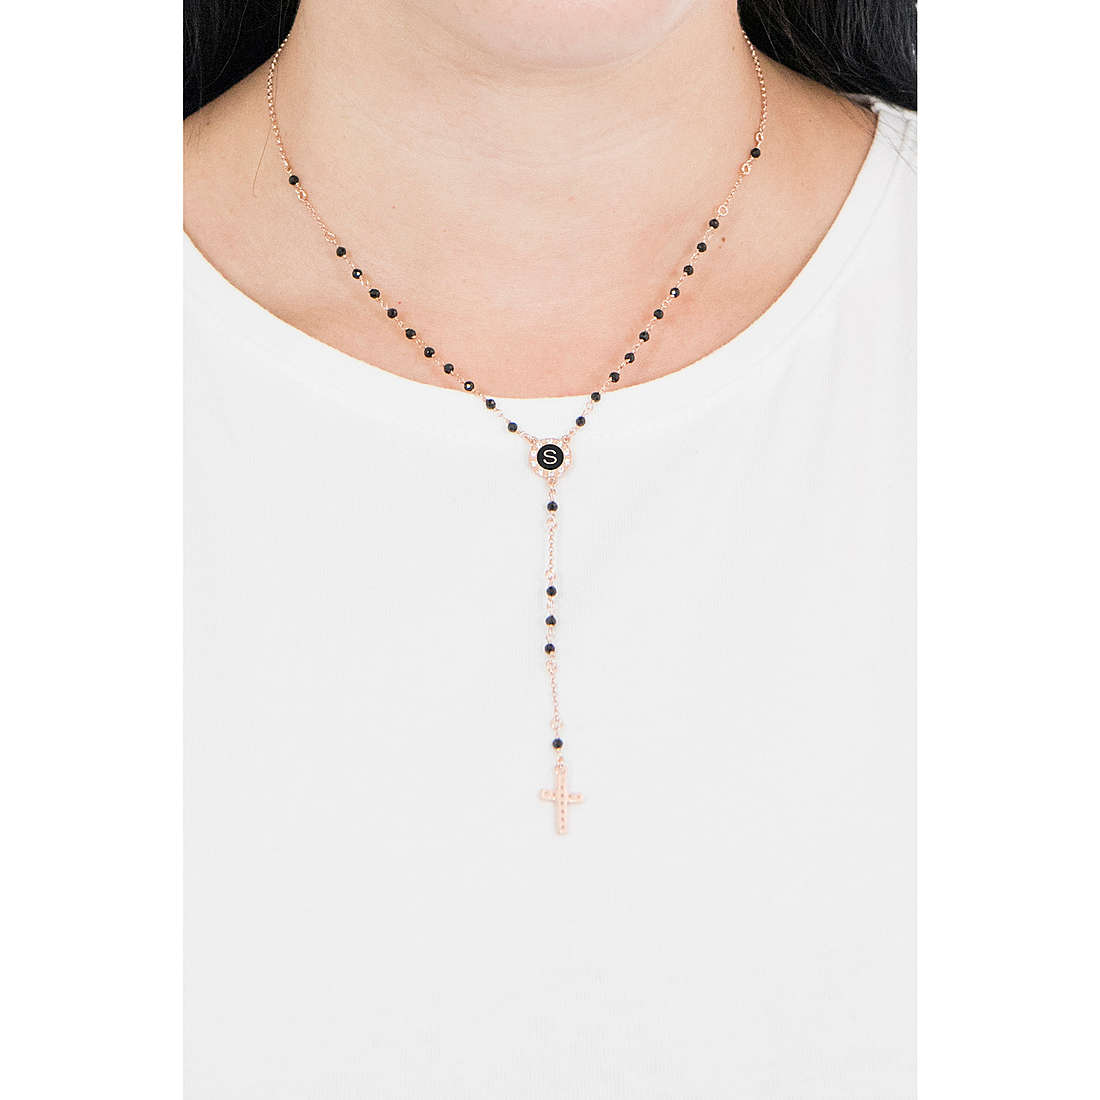 Dvccio necklaces Heave woman CRBPAGRN-s wearing